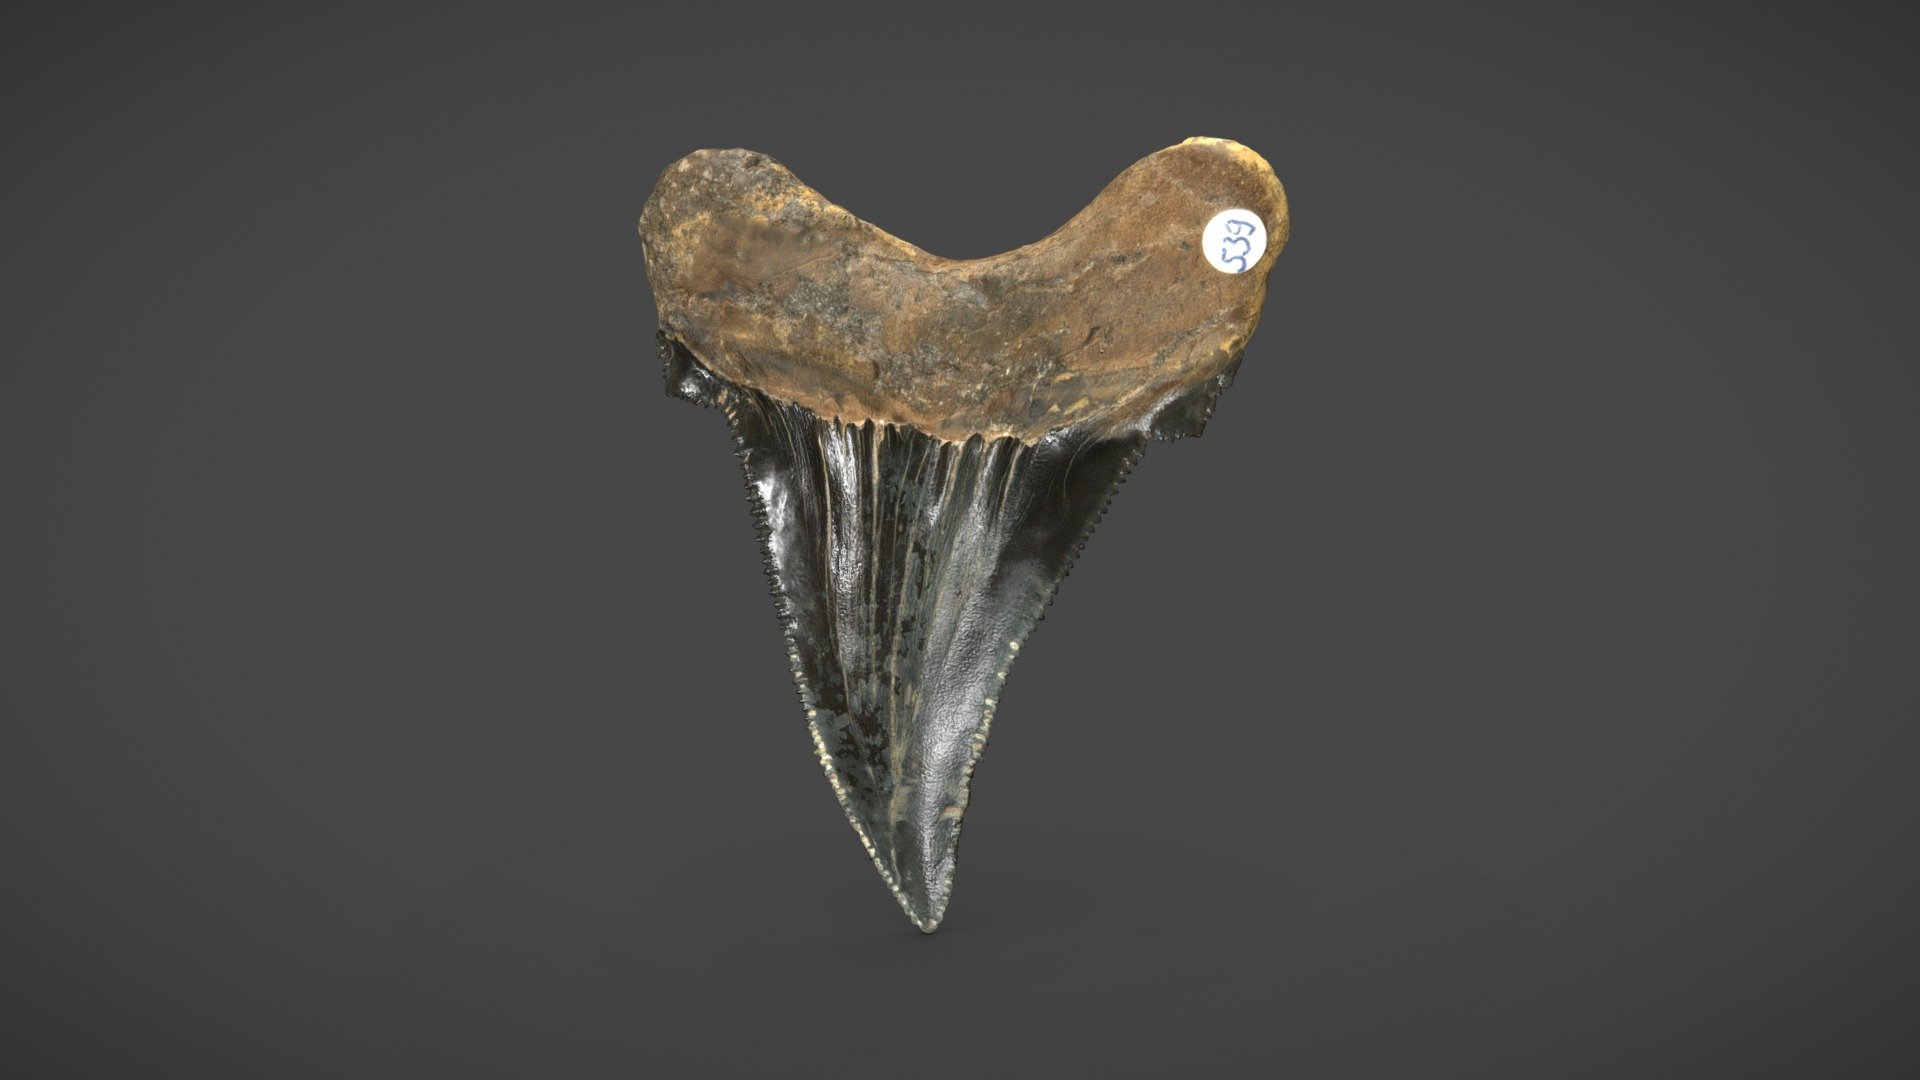 Photogrammetric scan of a well preserved Carcharocles megalodon tooth which me and my dad have found in a coal pit nearby in 1990. It is 7 x 6 x 2cm in size 3d model